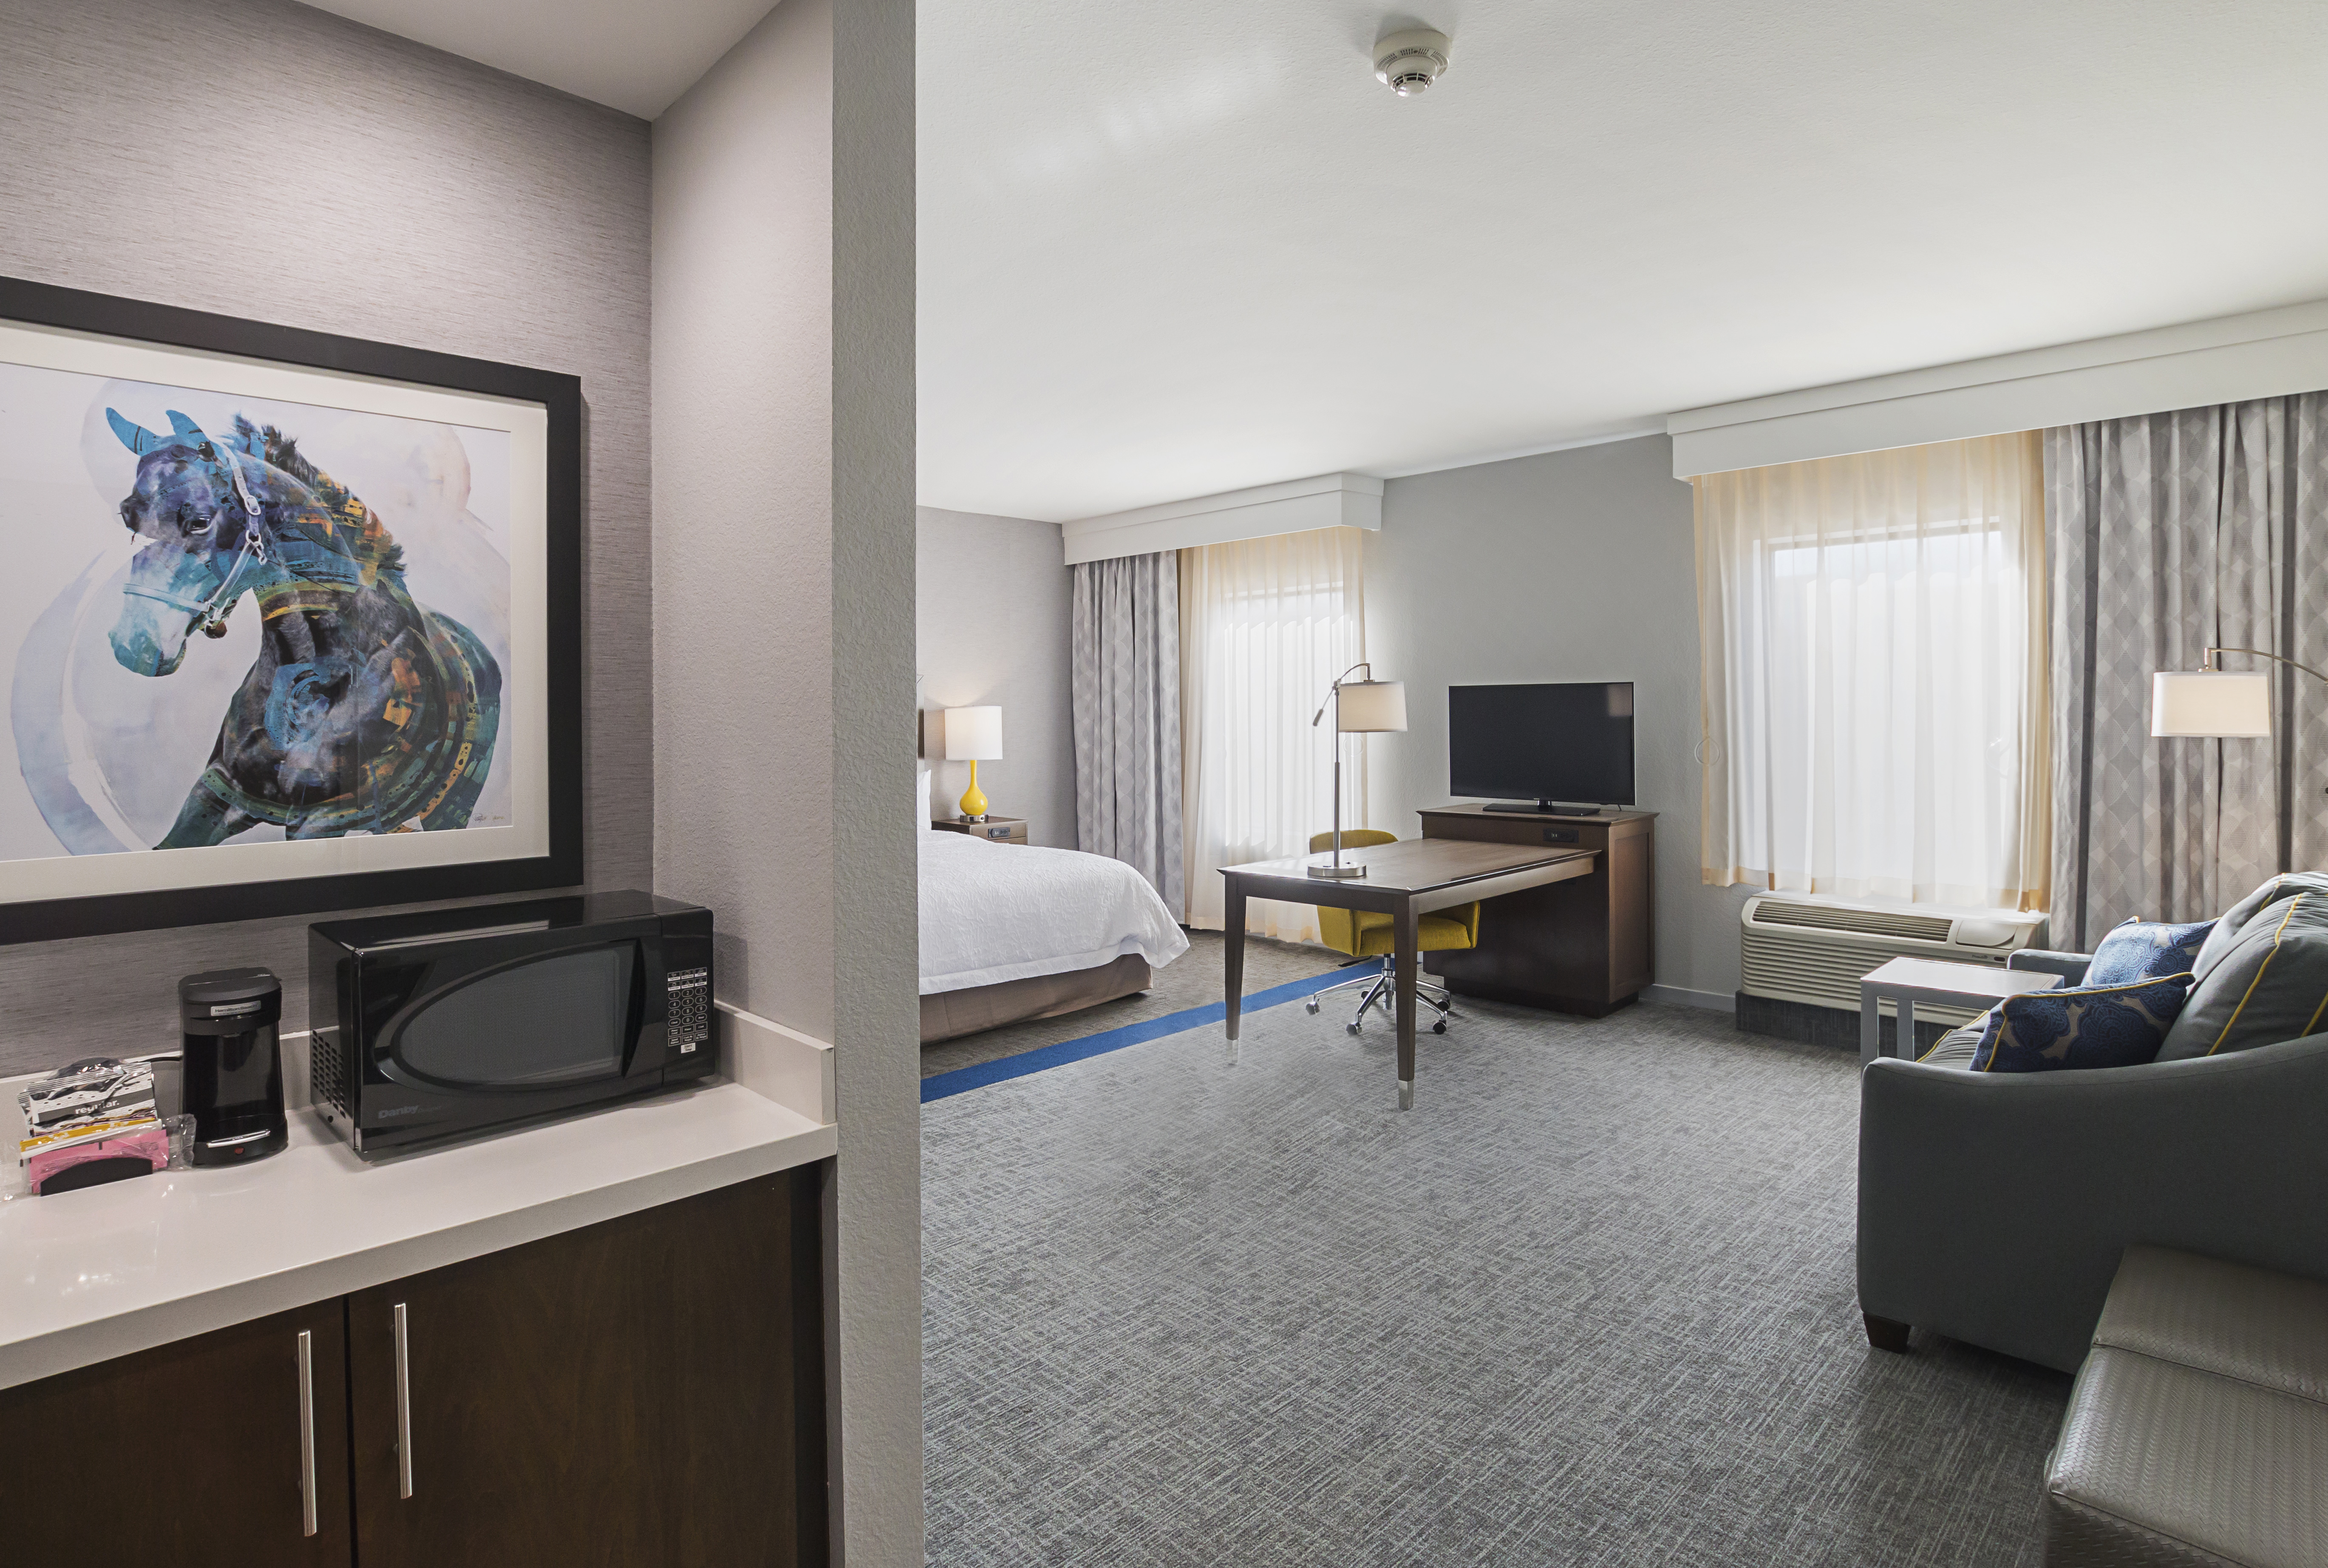 Hotel studio room with wet bar on left
  and sofabed on right with king-size bed around corner and next to
  entertainment center and desk